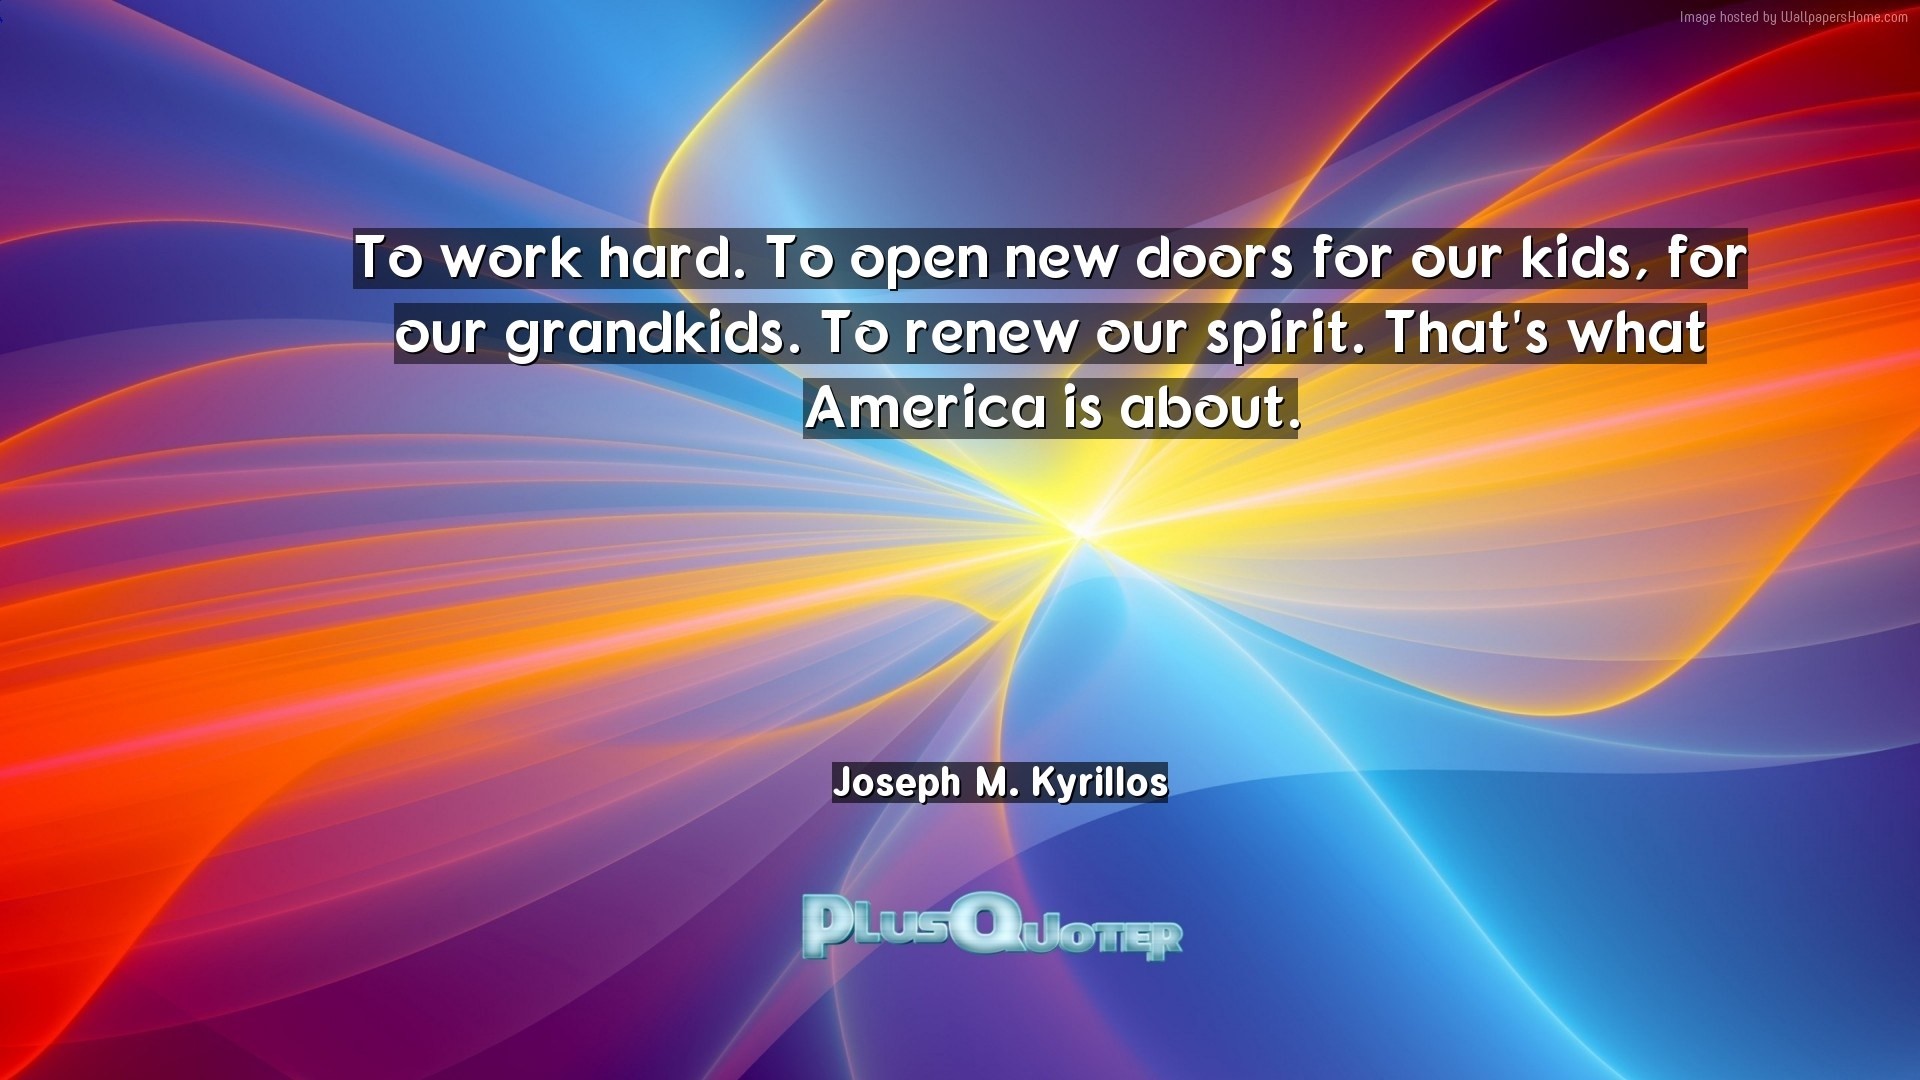 1920x1080 Download Wallpaper with inspirational Quotes- "To work hard. To open new  doors for